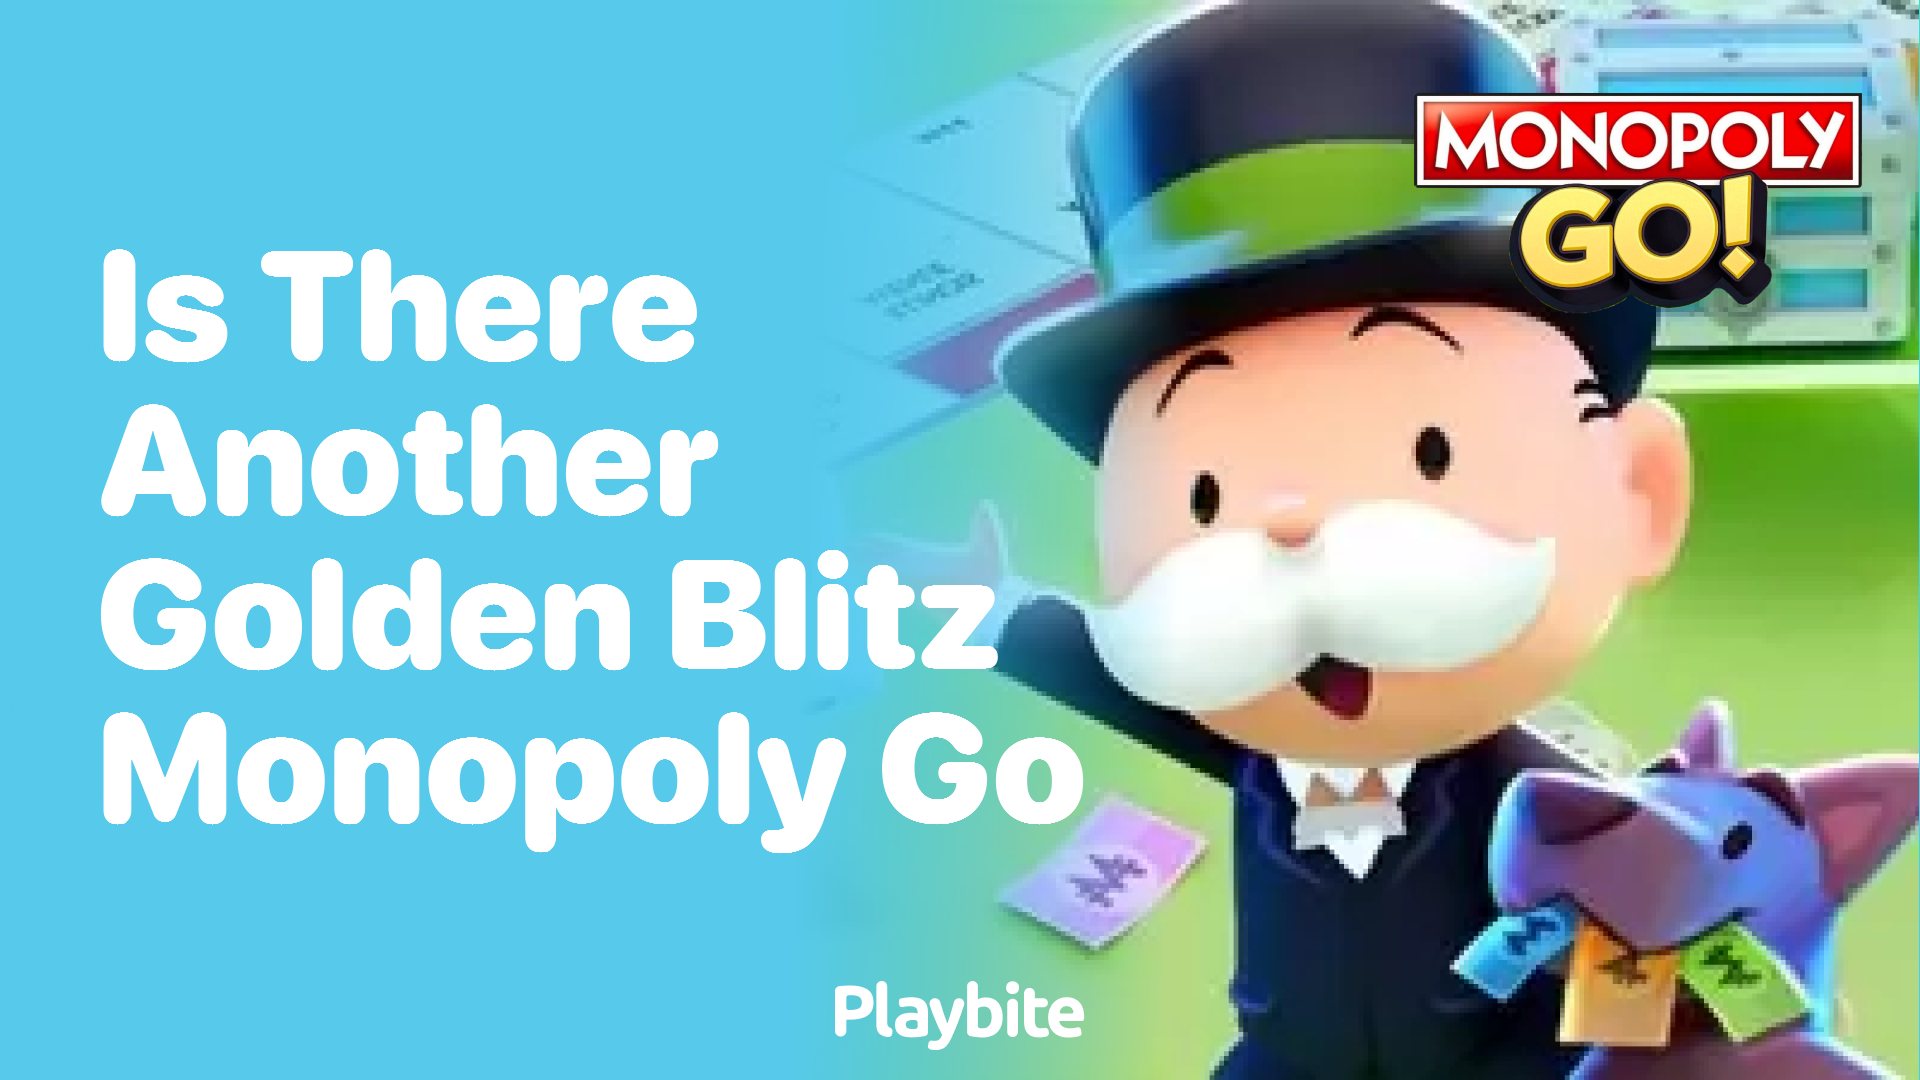 Is There Another Golden Blitz in Monopoly Go?